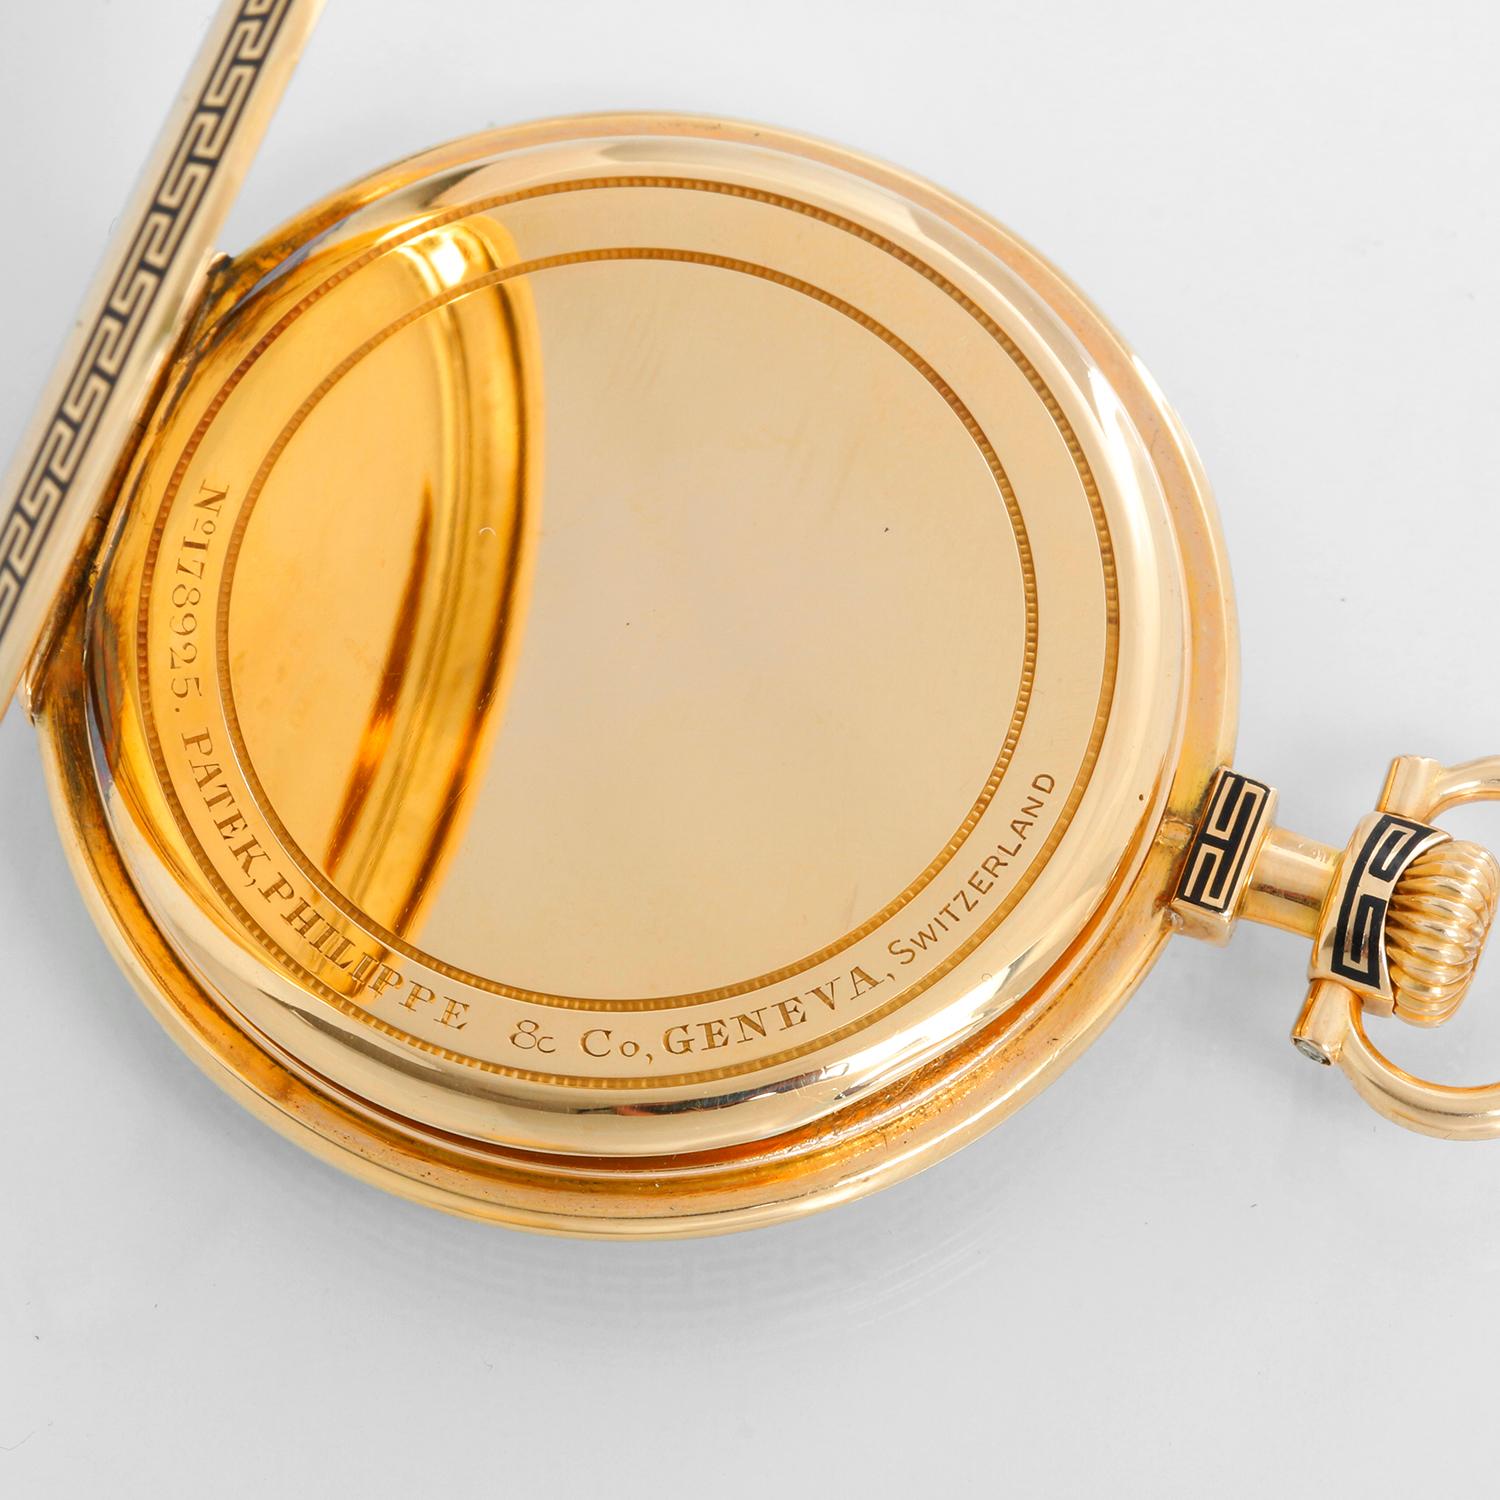 Patek Philippe Open Face 18K Yellow Gold Pocket Watch In Excellent Condition For Sale In Dallas, TX